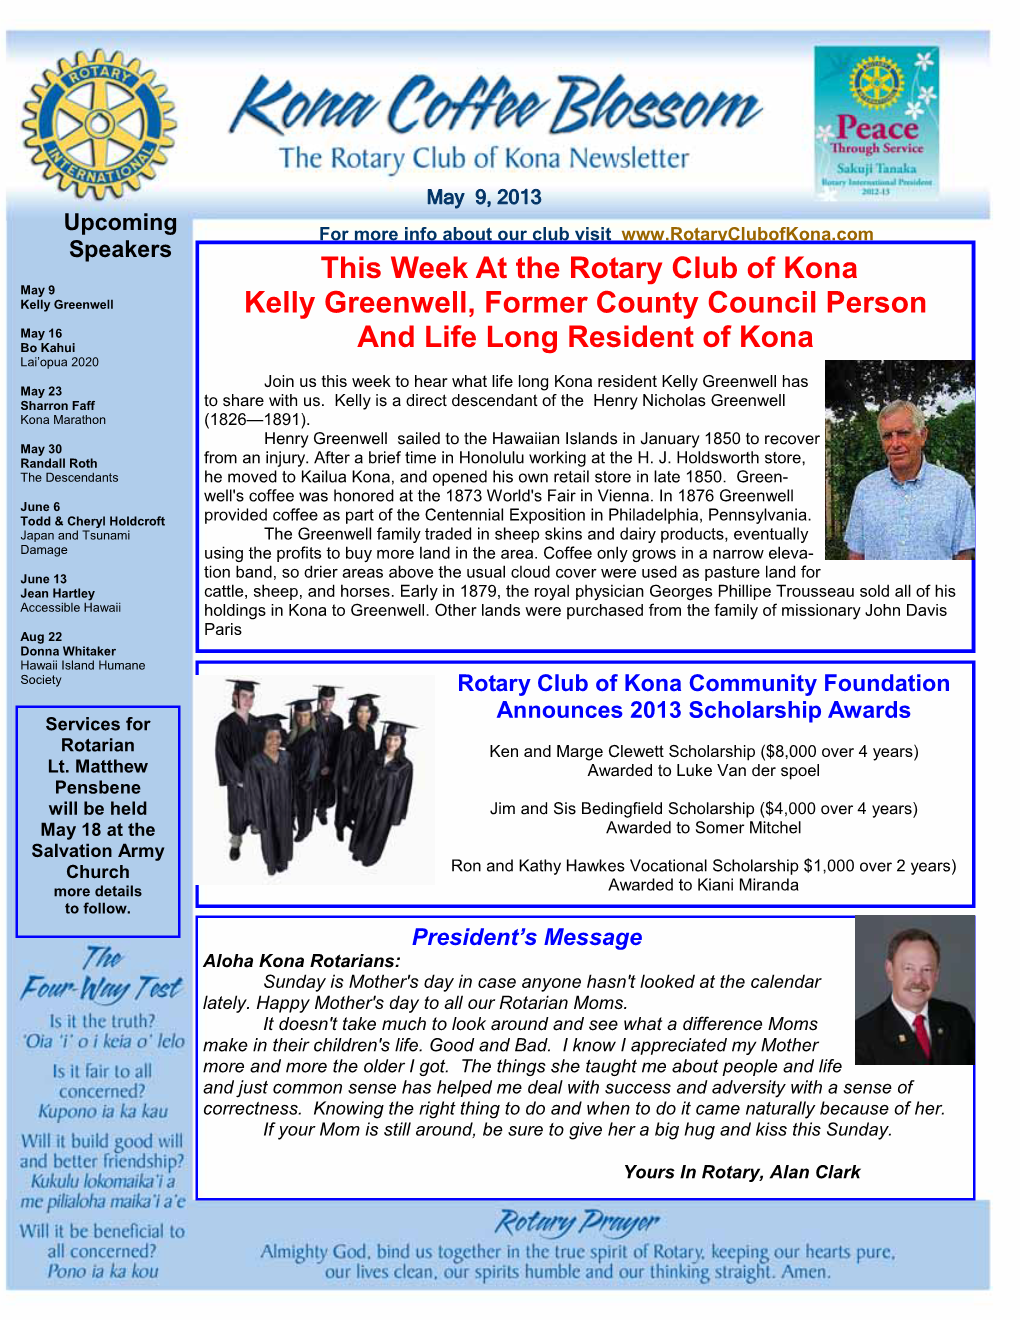 This Week at the Rotary Club of Kona Kelly Greenwell, Former County